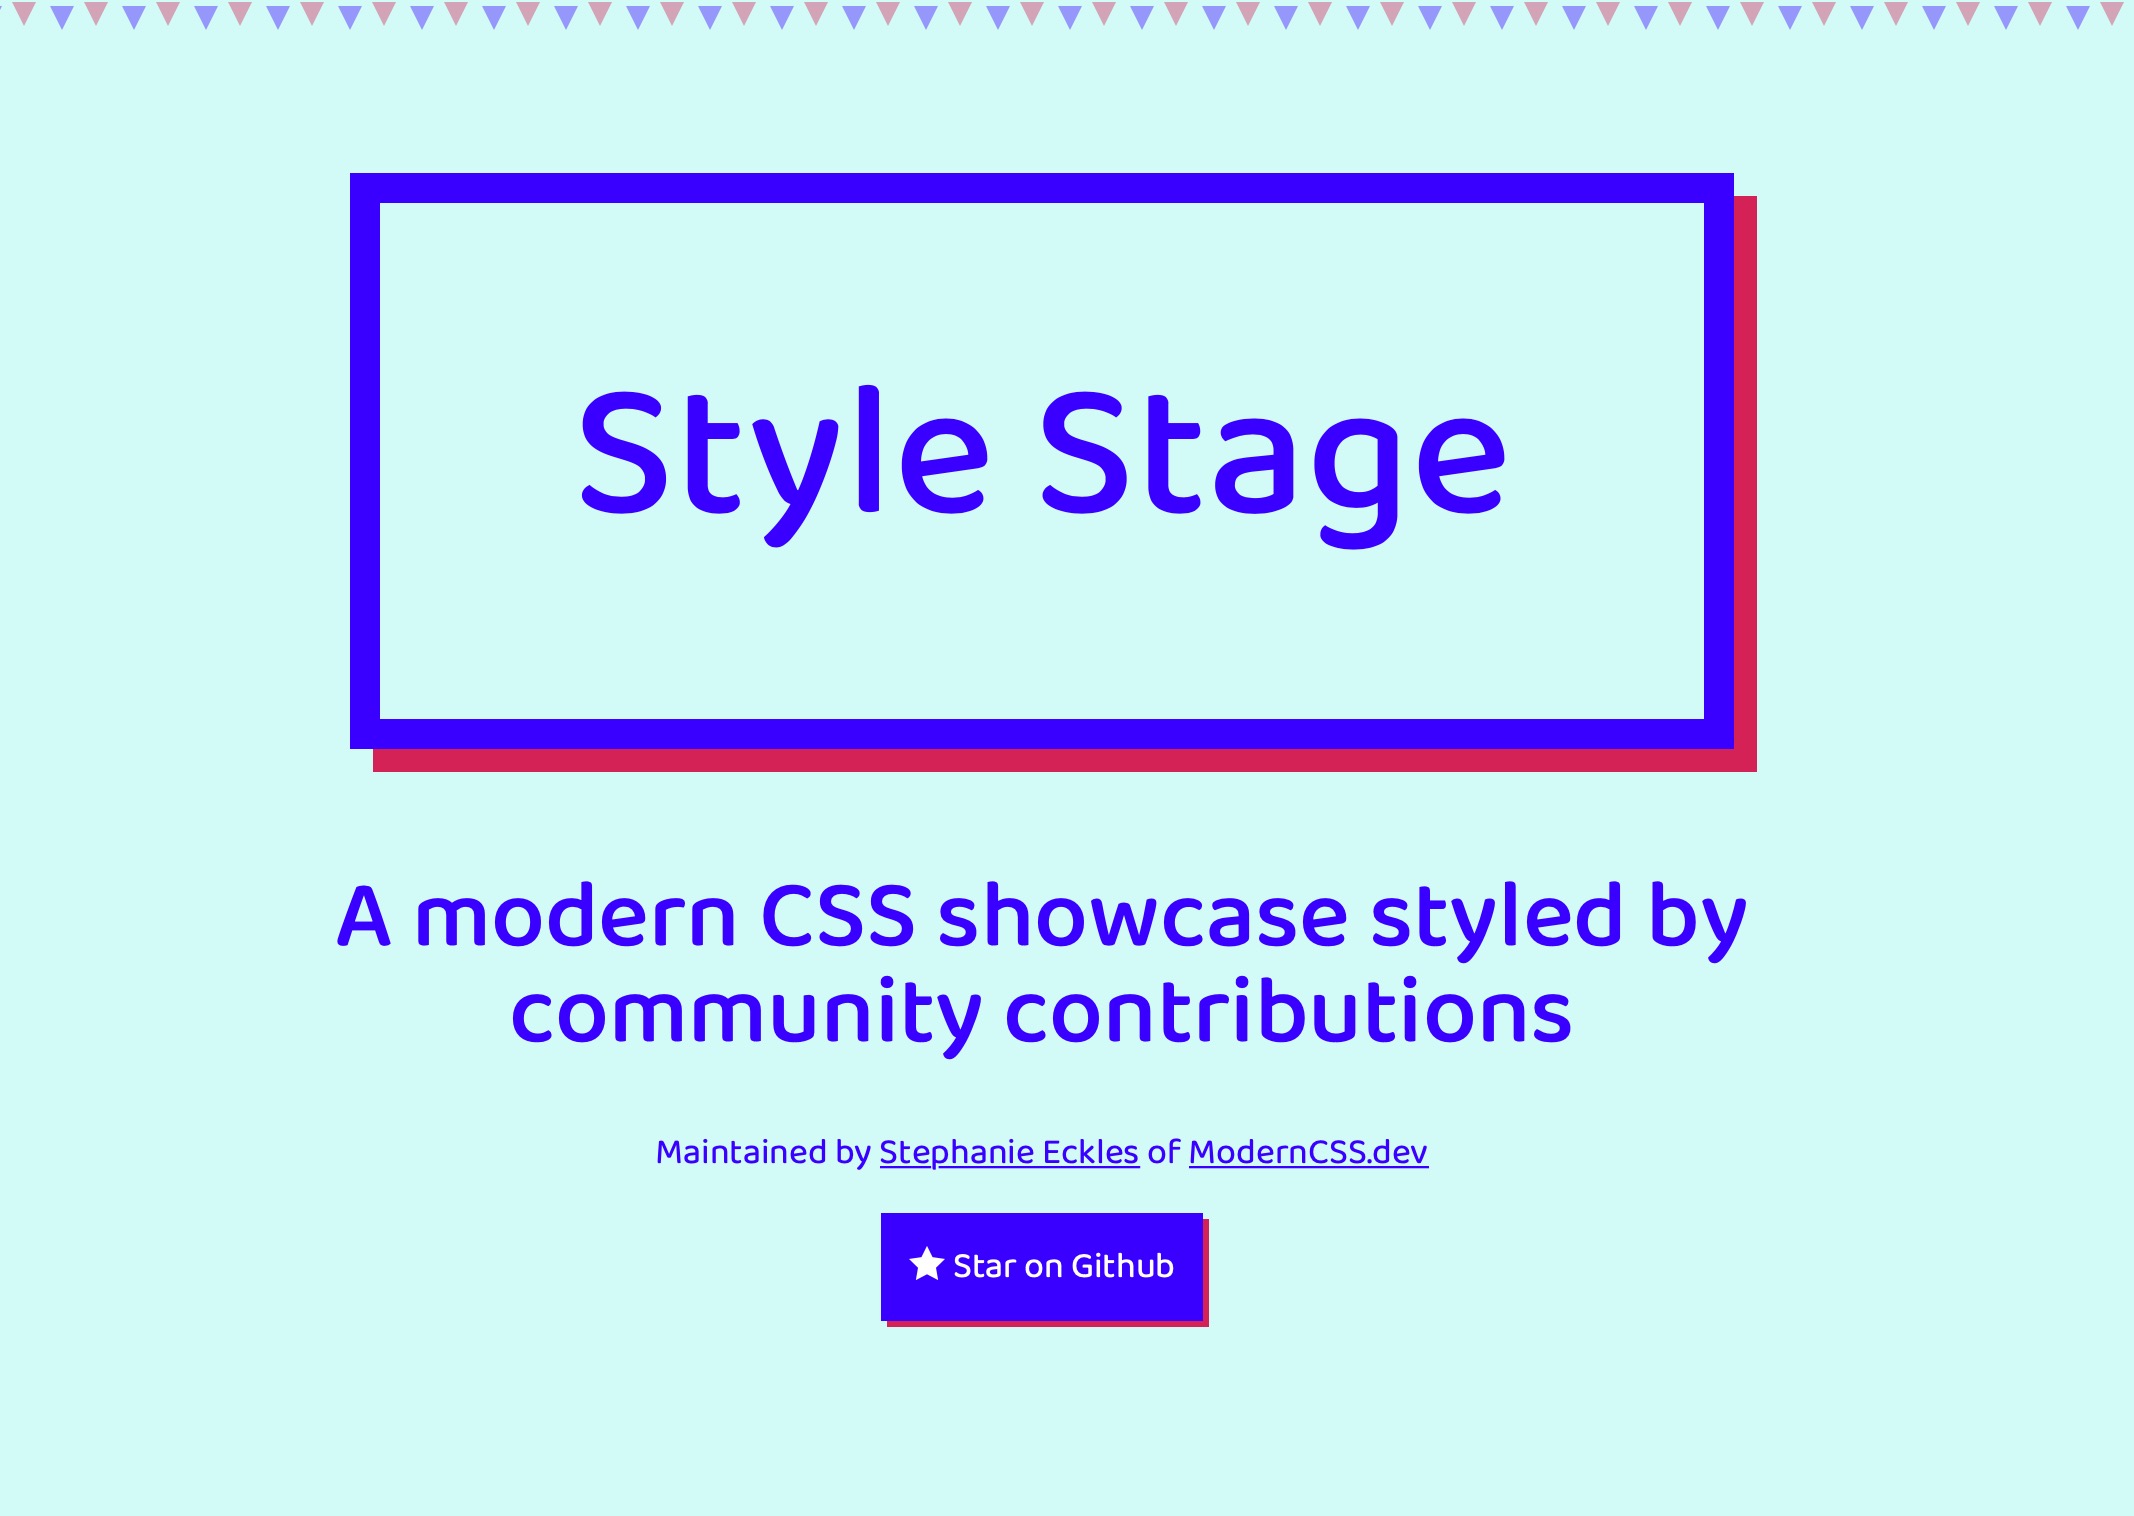 A very bold homepage which features "Style Stage" in massive letters